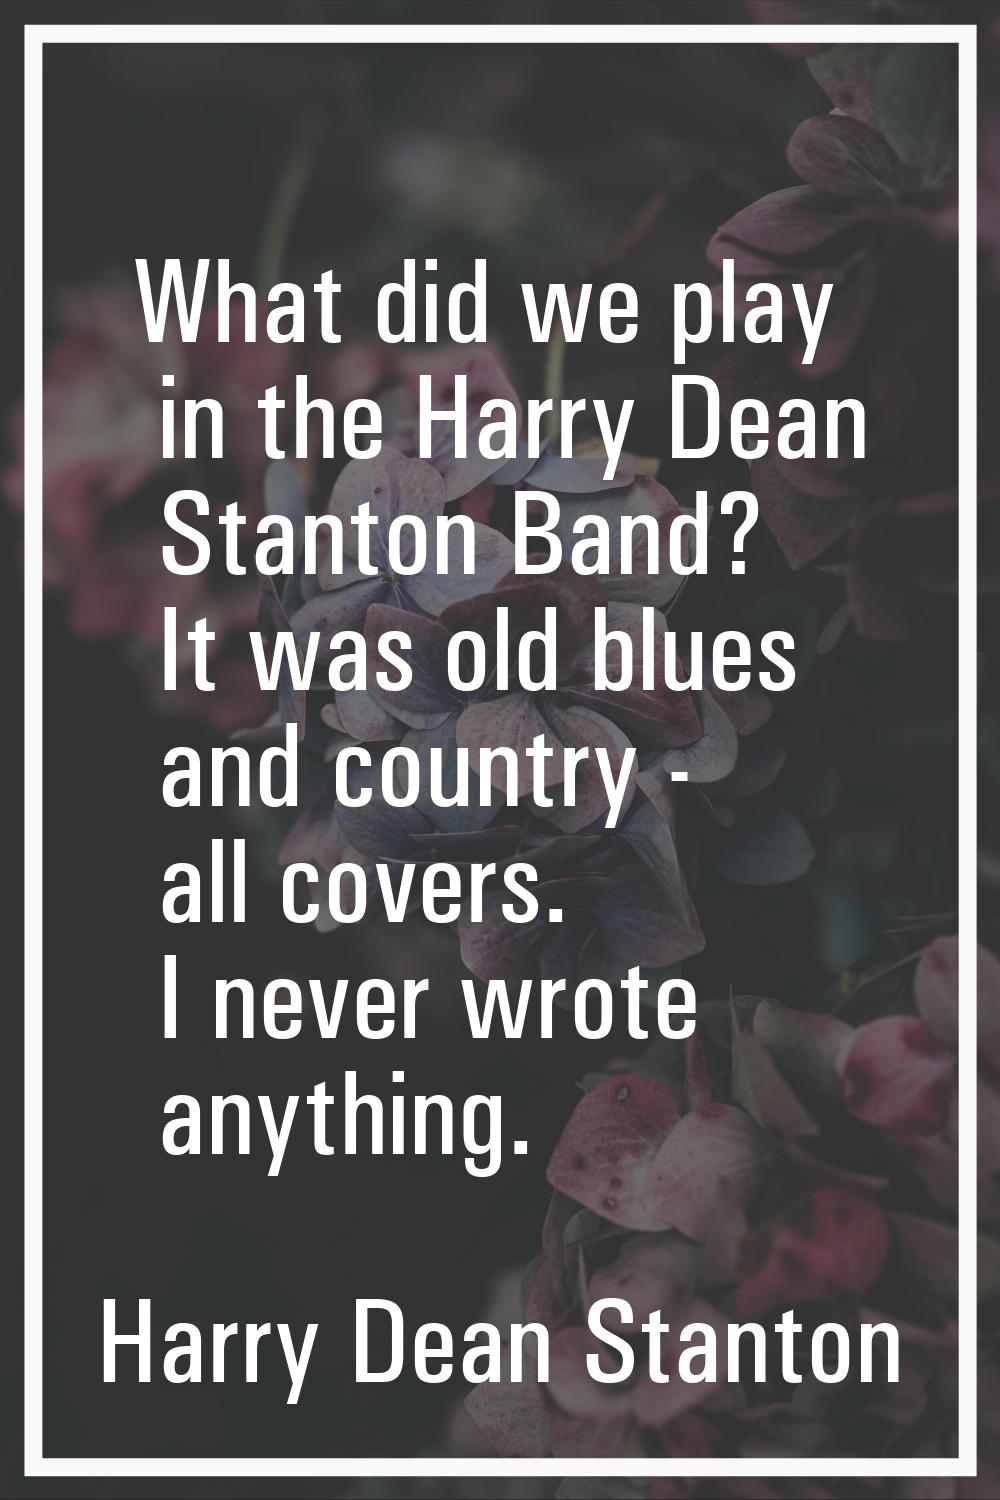 What did we play in the Harry Dean Stanton Band? It was old blues and country - all covers. I never